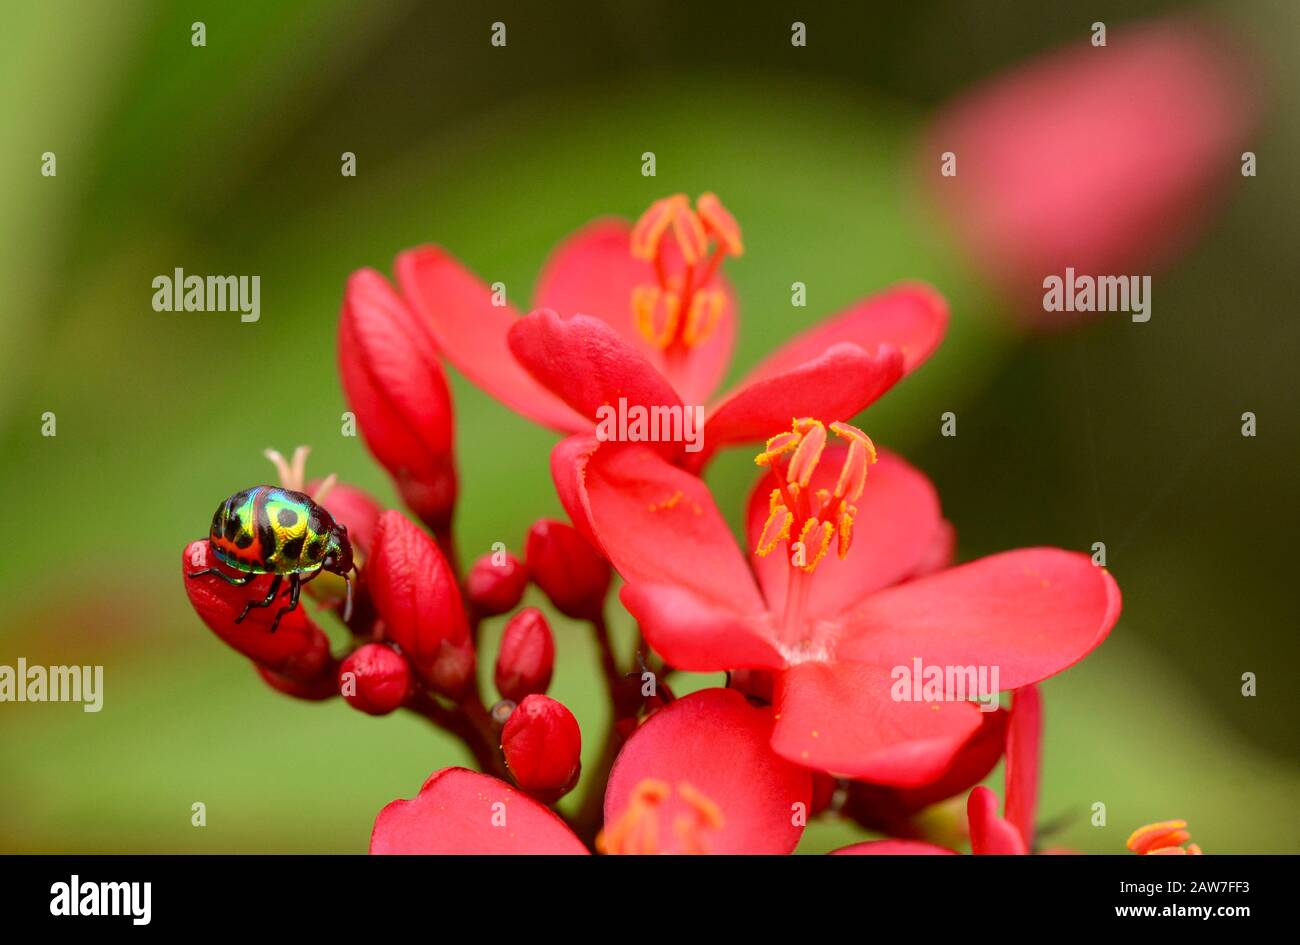 jewel beetle on a tropical red flower Stock Photo